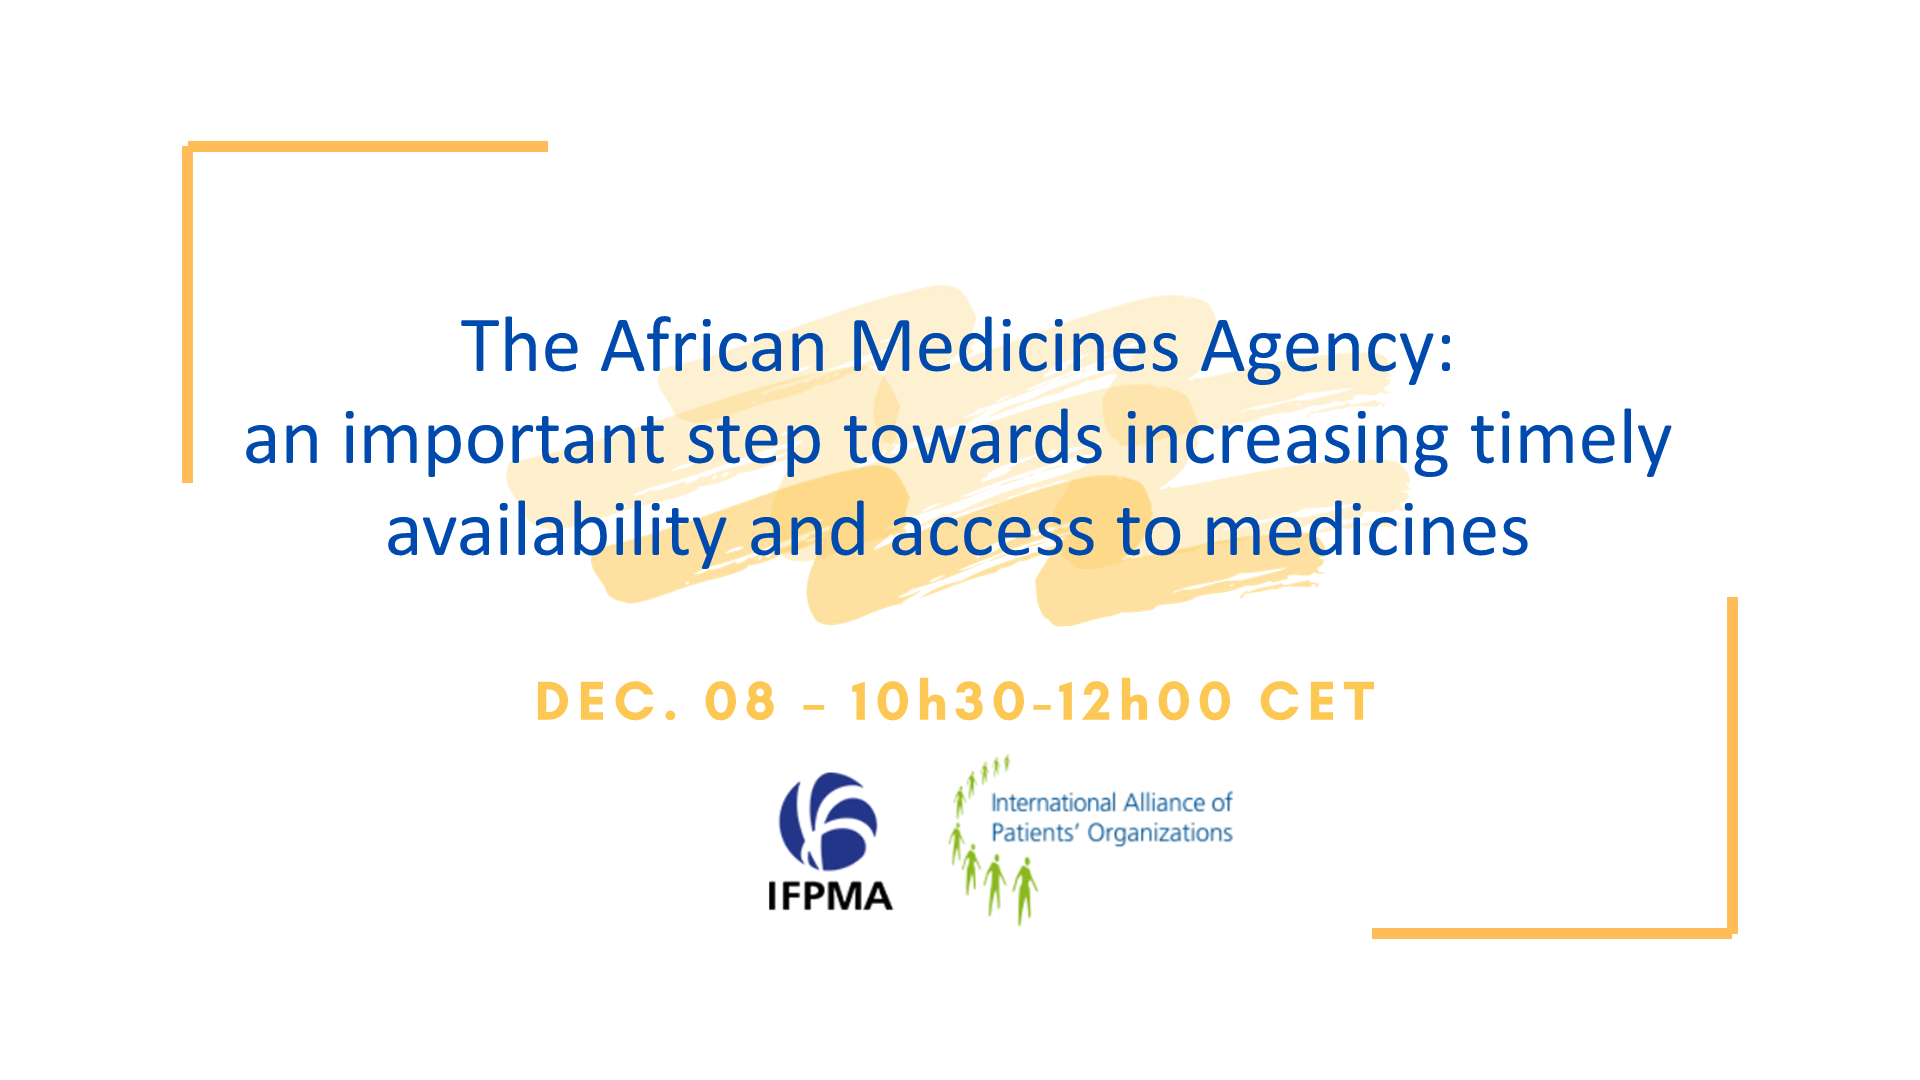 IFPMA-IAPO Webinar: The African Medicines Agency - an important step towards increasing timely availability and access to medicinal products for patients in Africa